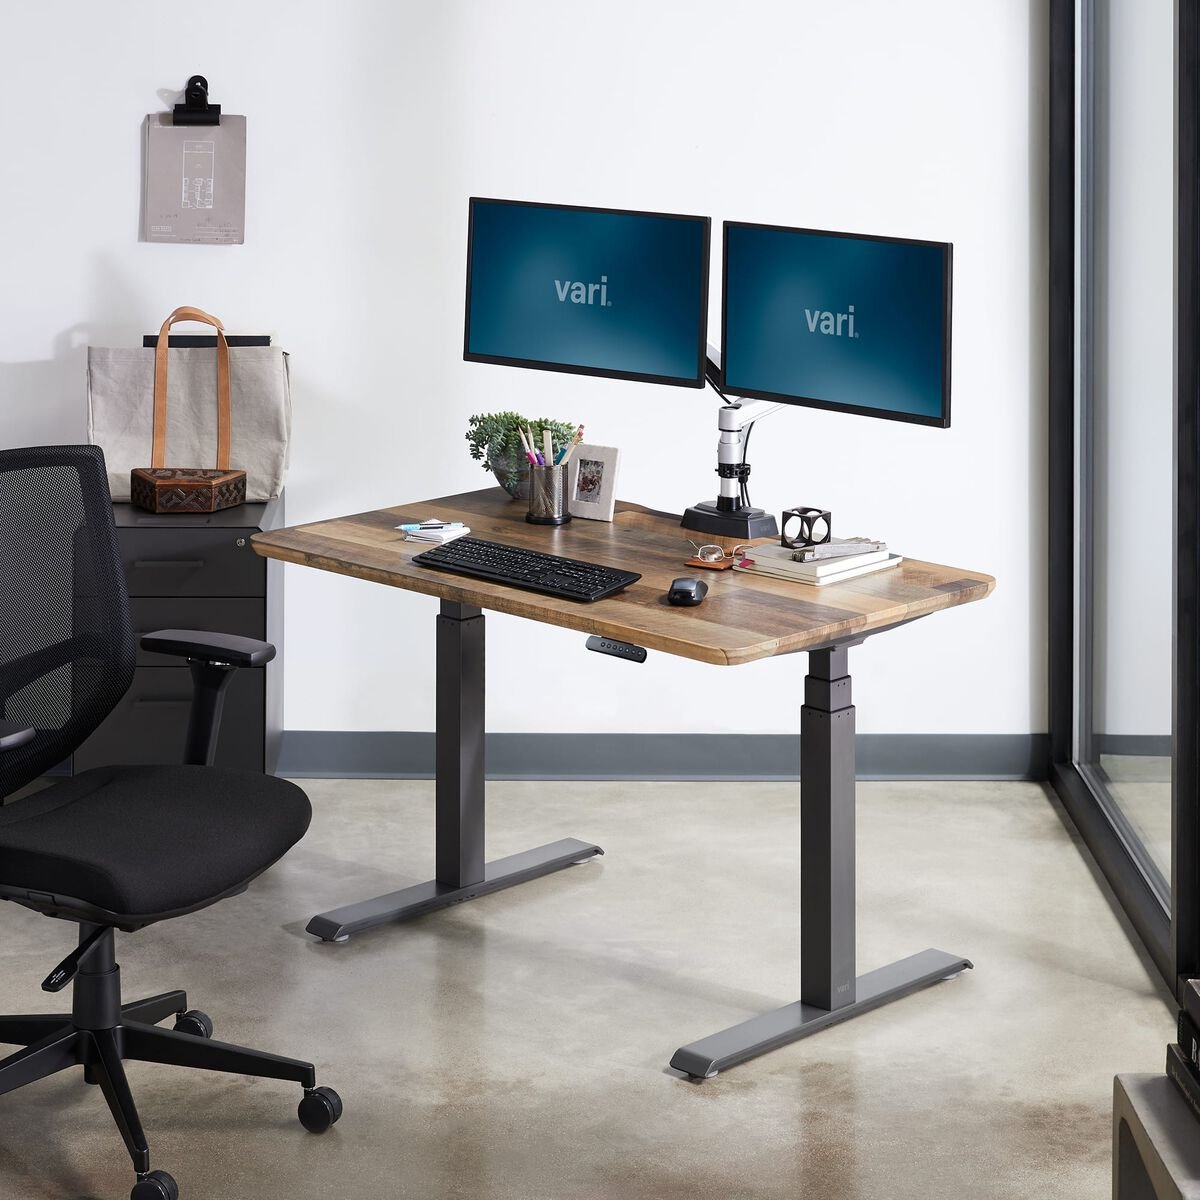 Work All Day in Comfort with These 9 Desk Accessories – LifeSavvy